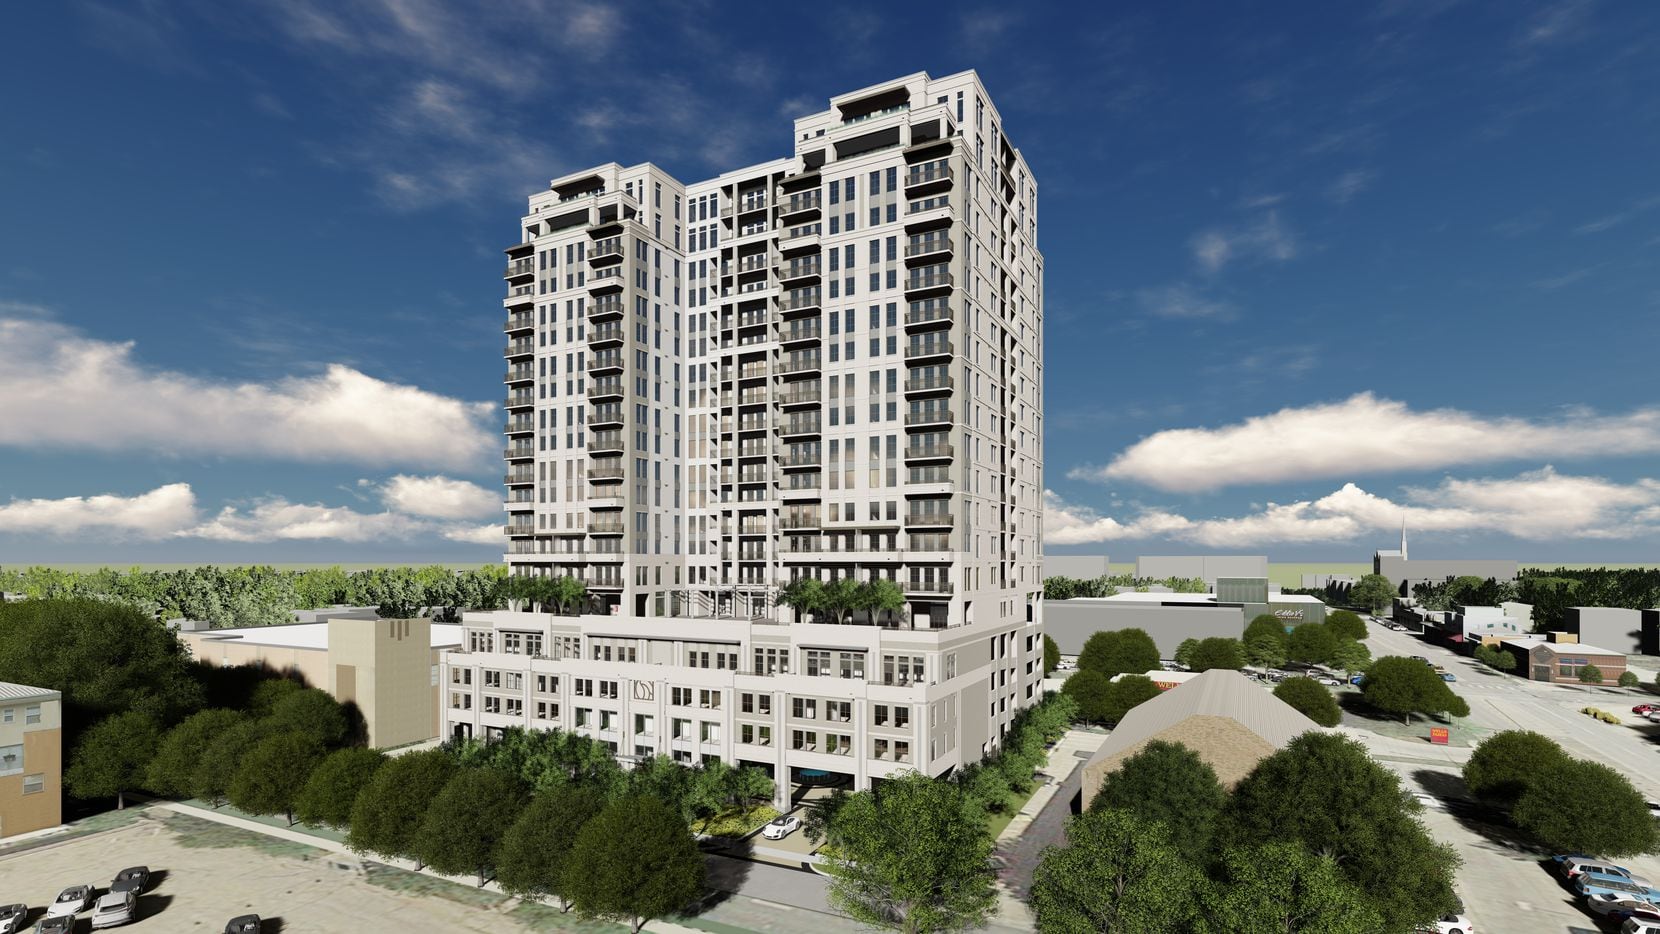 The 20-story tower will be located near Oak Lawn Avenue.